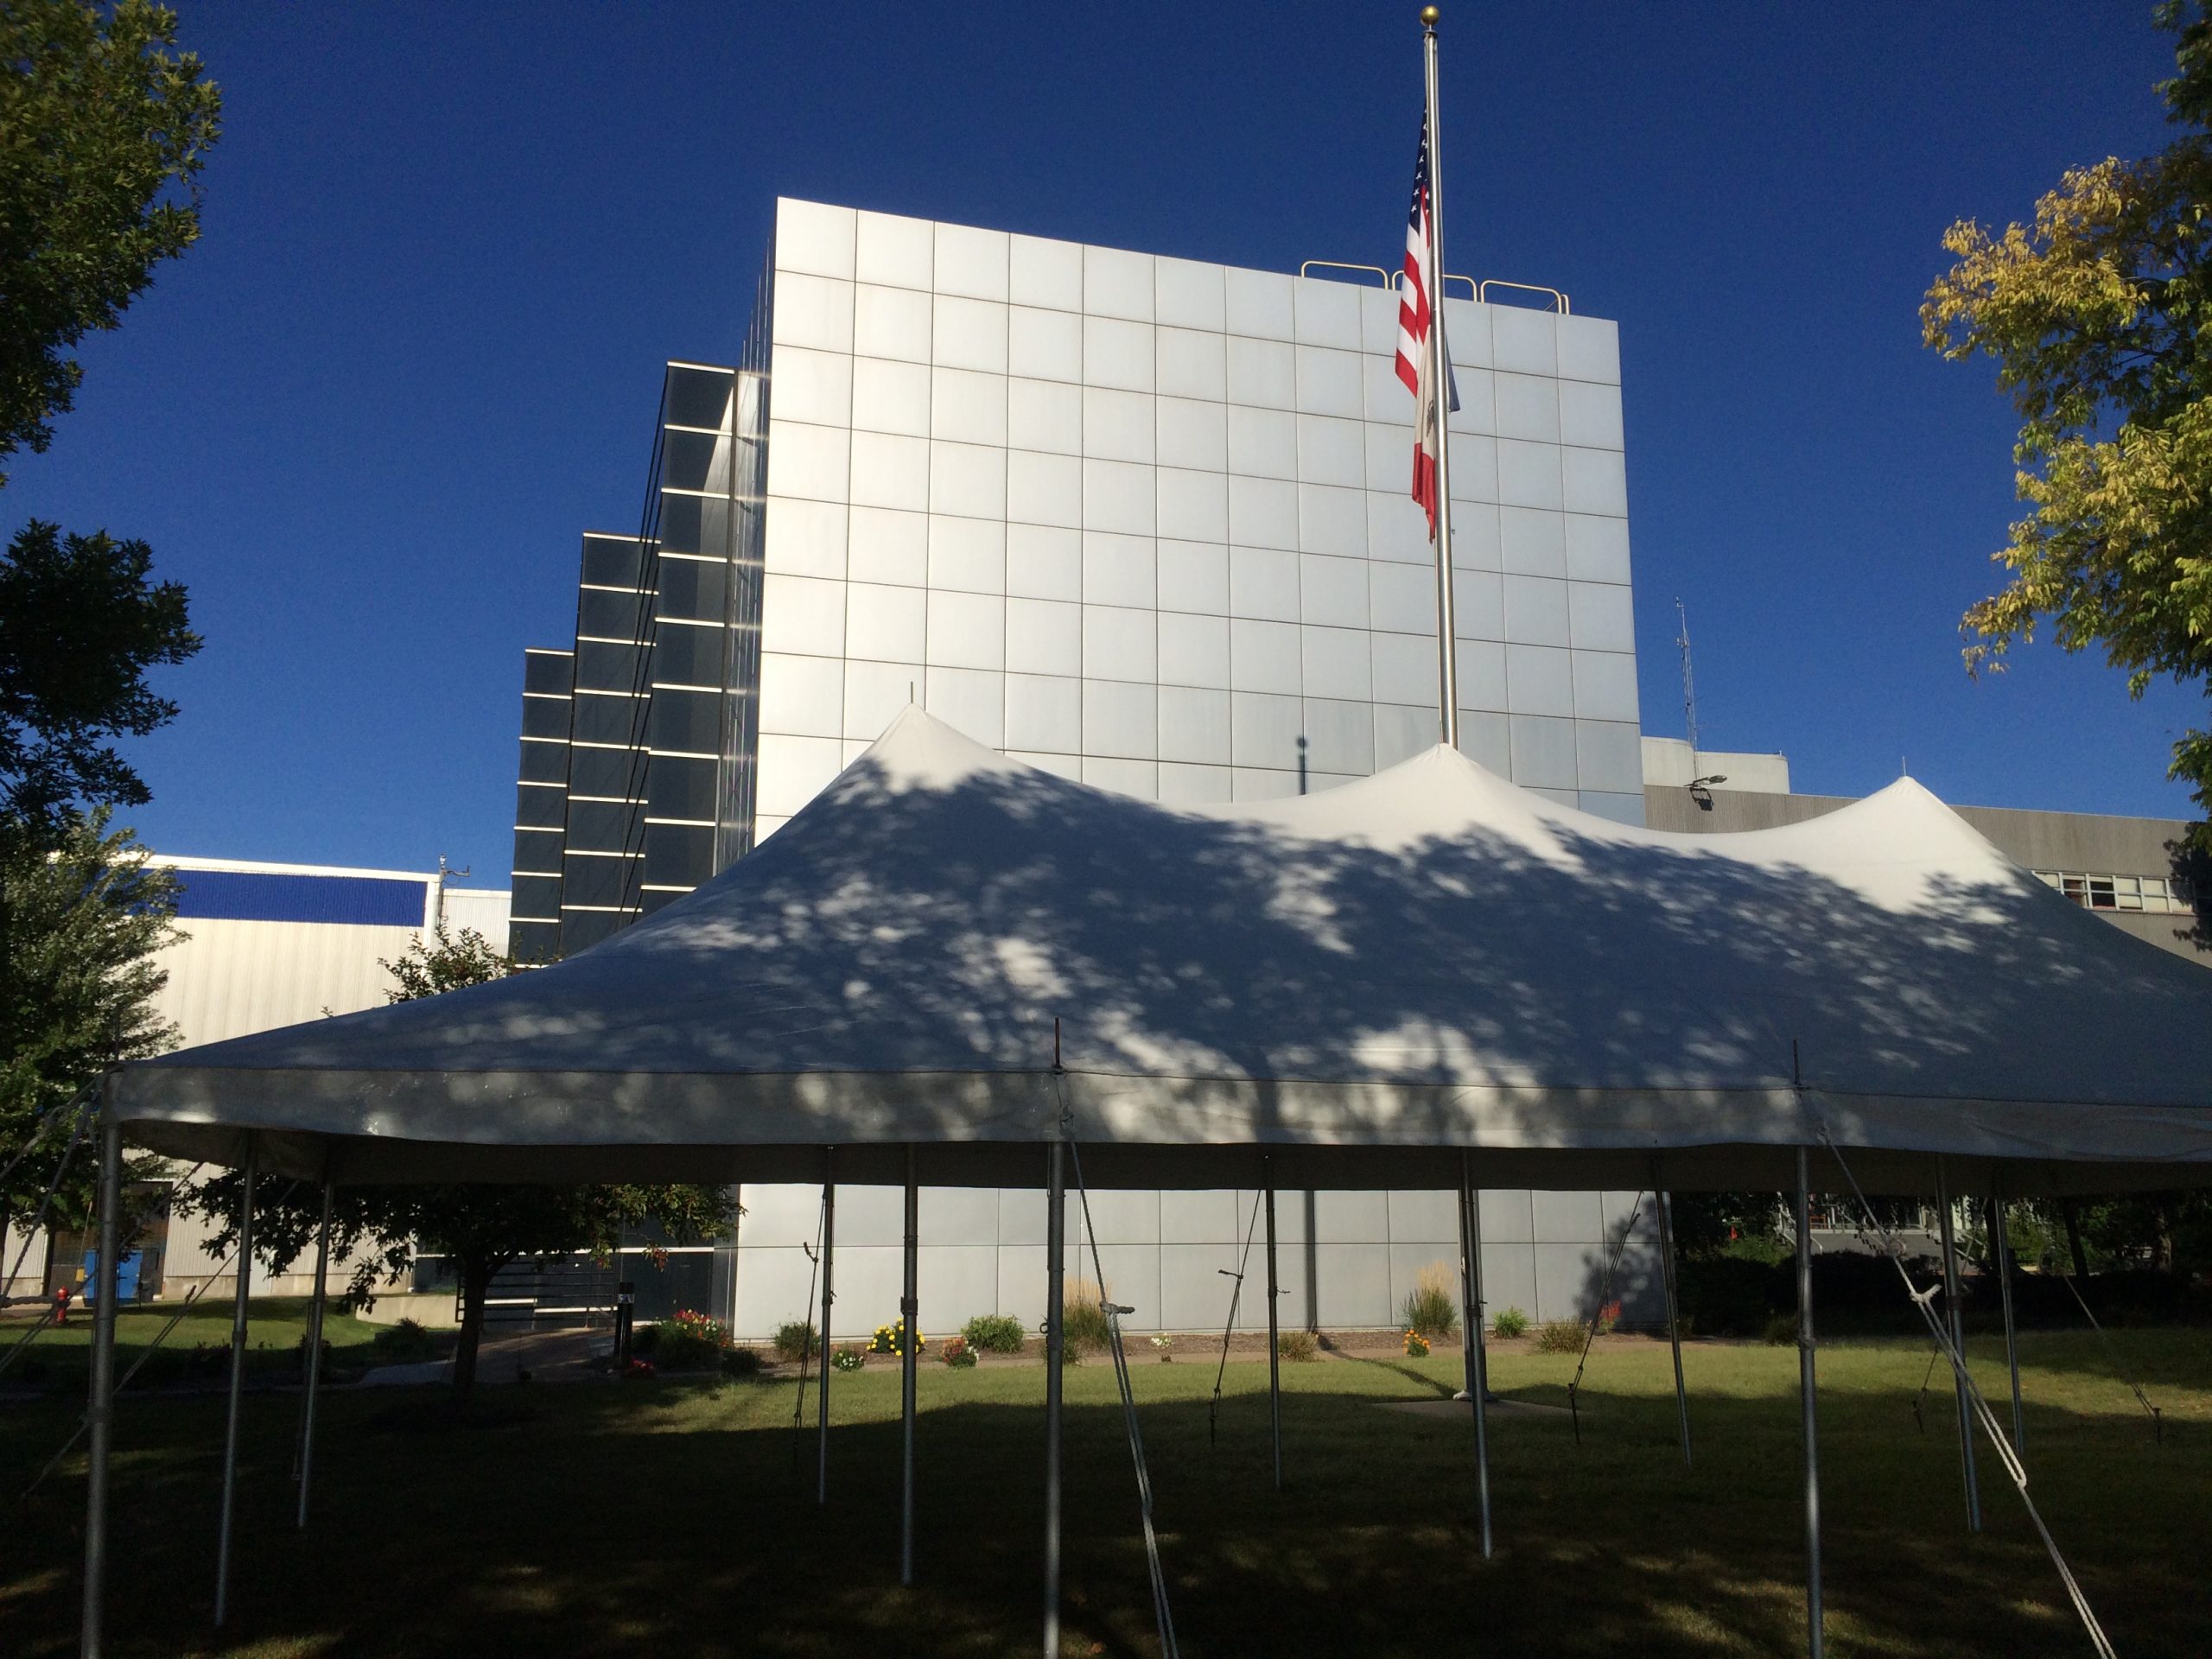 20′ x 40′ rope an pole tent at Alcoa in Bettendorf, Iowa